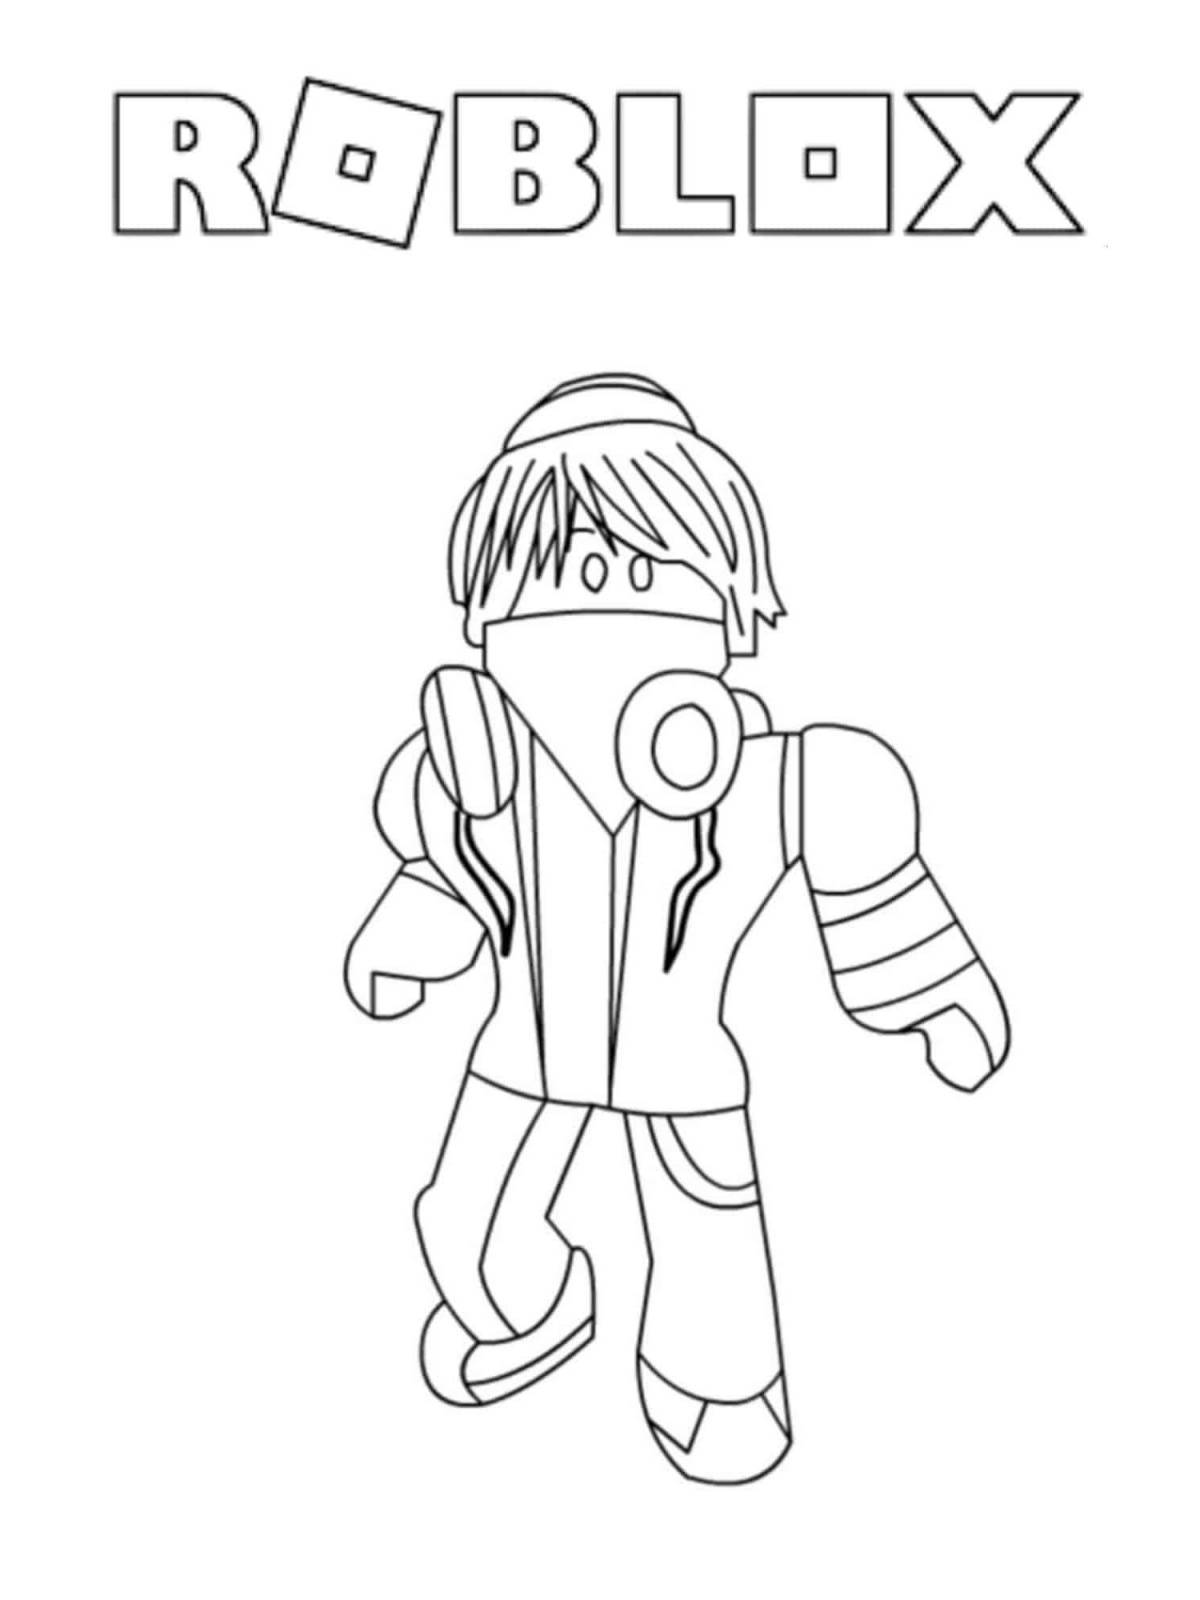 Roblox incredible doors coloring page